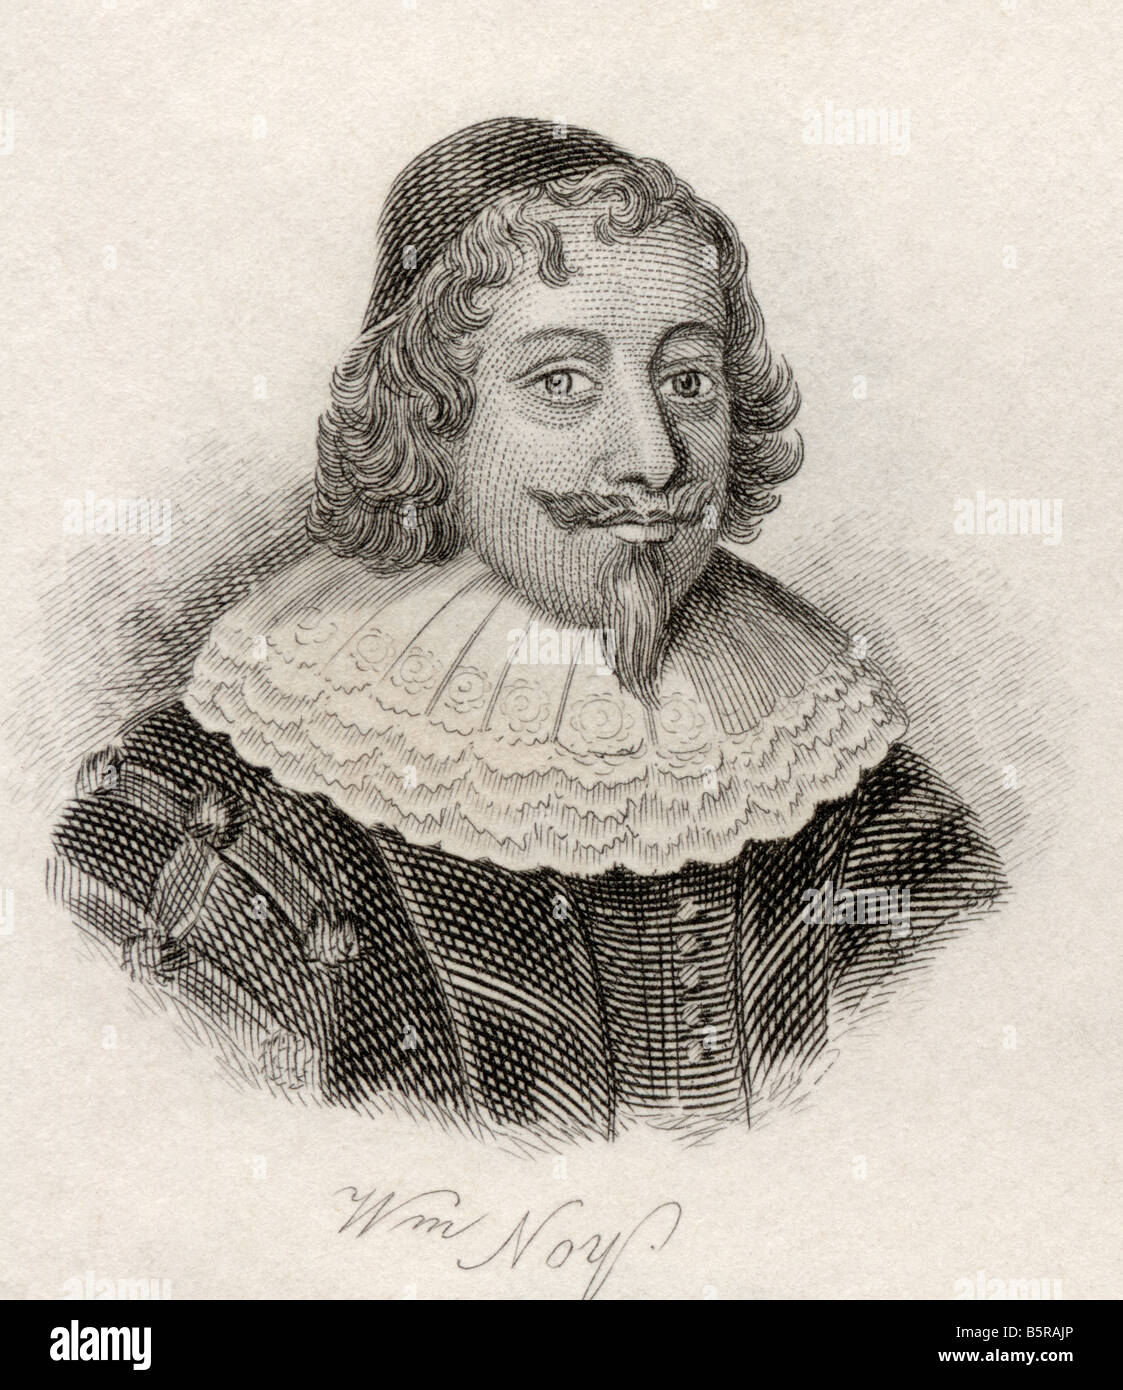 William Noy, 1577 - 1634. British jurist.  From the book Crabb's Historical Dictionary, published 1825. Stock Photo